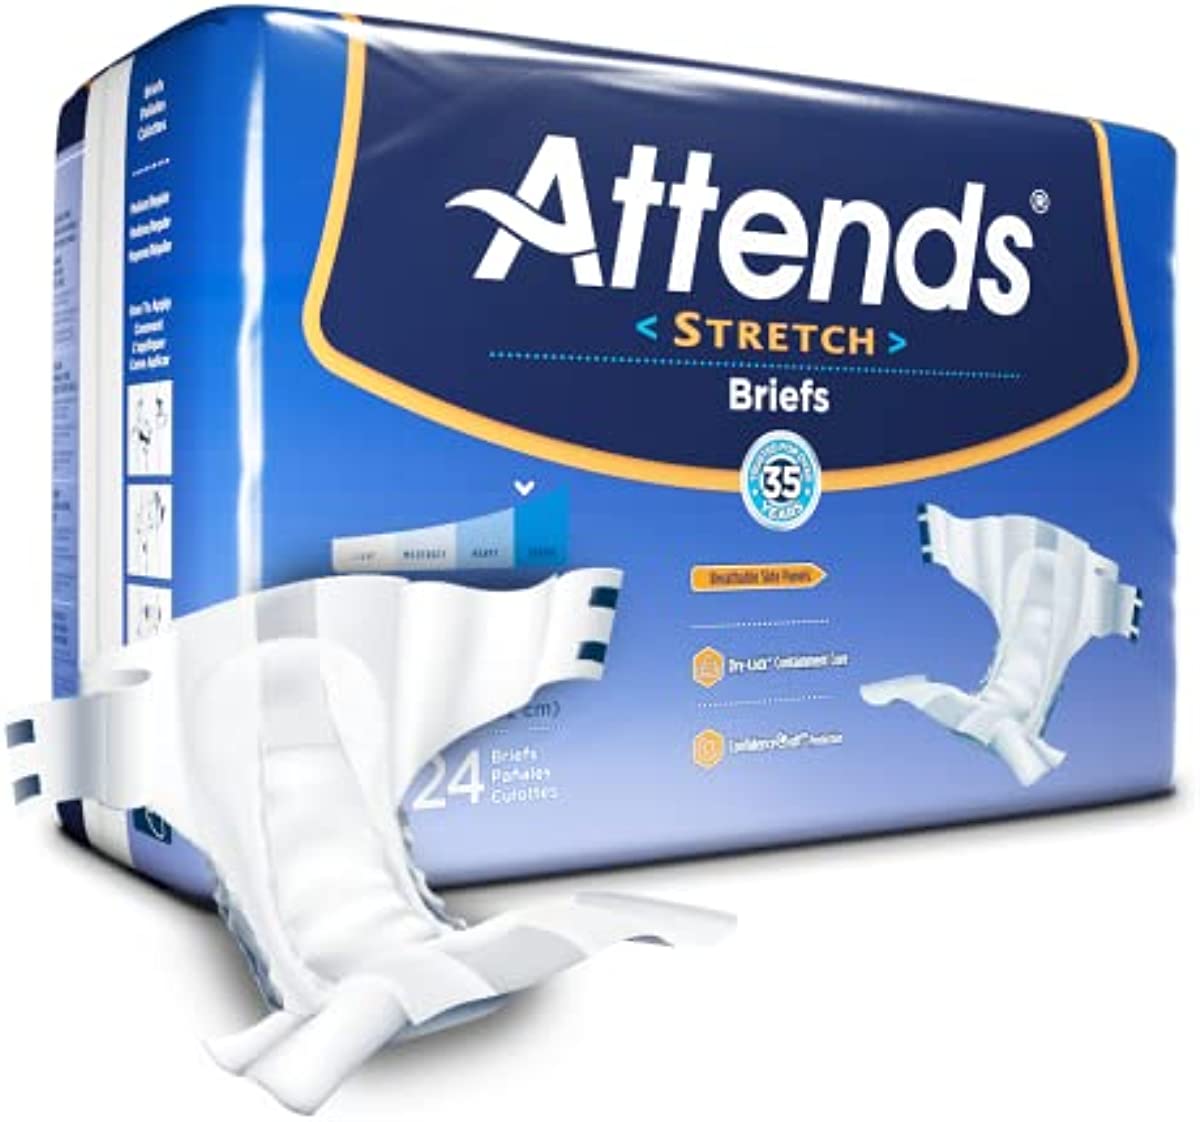 Attends Stretch Briefs with Advanced Dry-Lock Technology for Adult Incontinence Care, Medium/Regular, Unisex, 24 Count (Pack of 4)